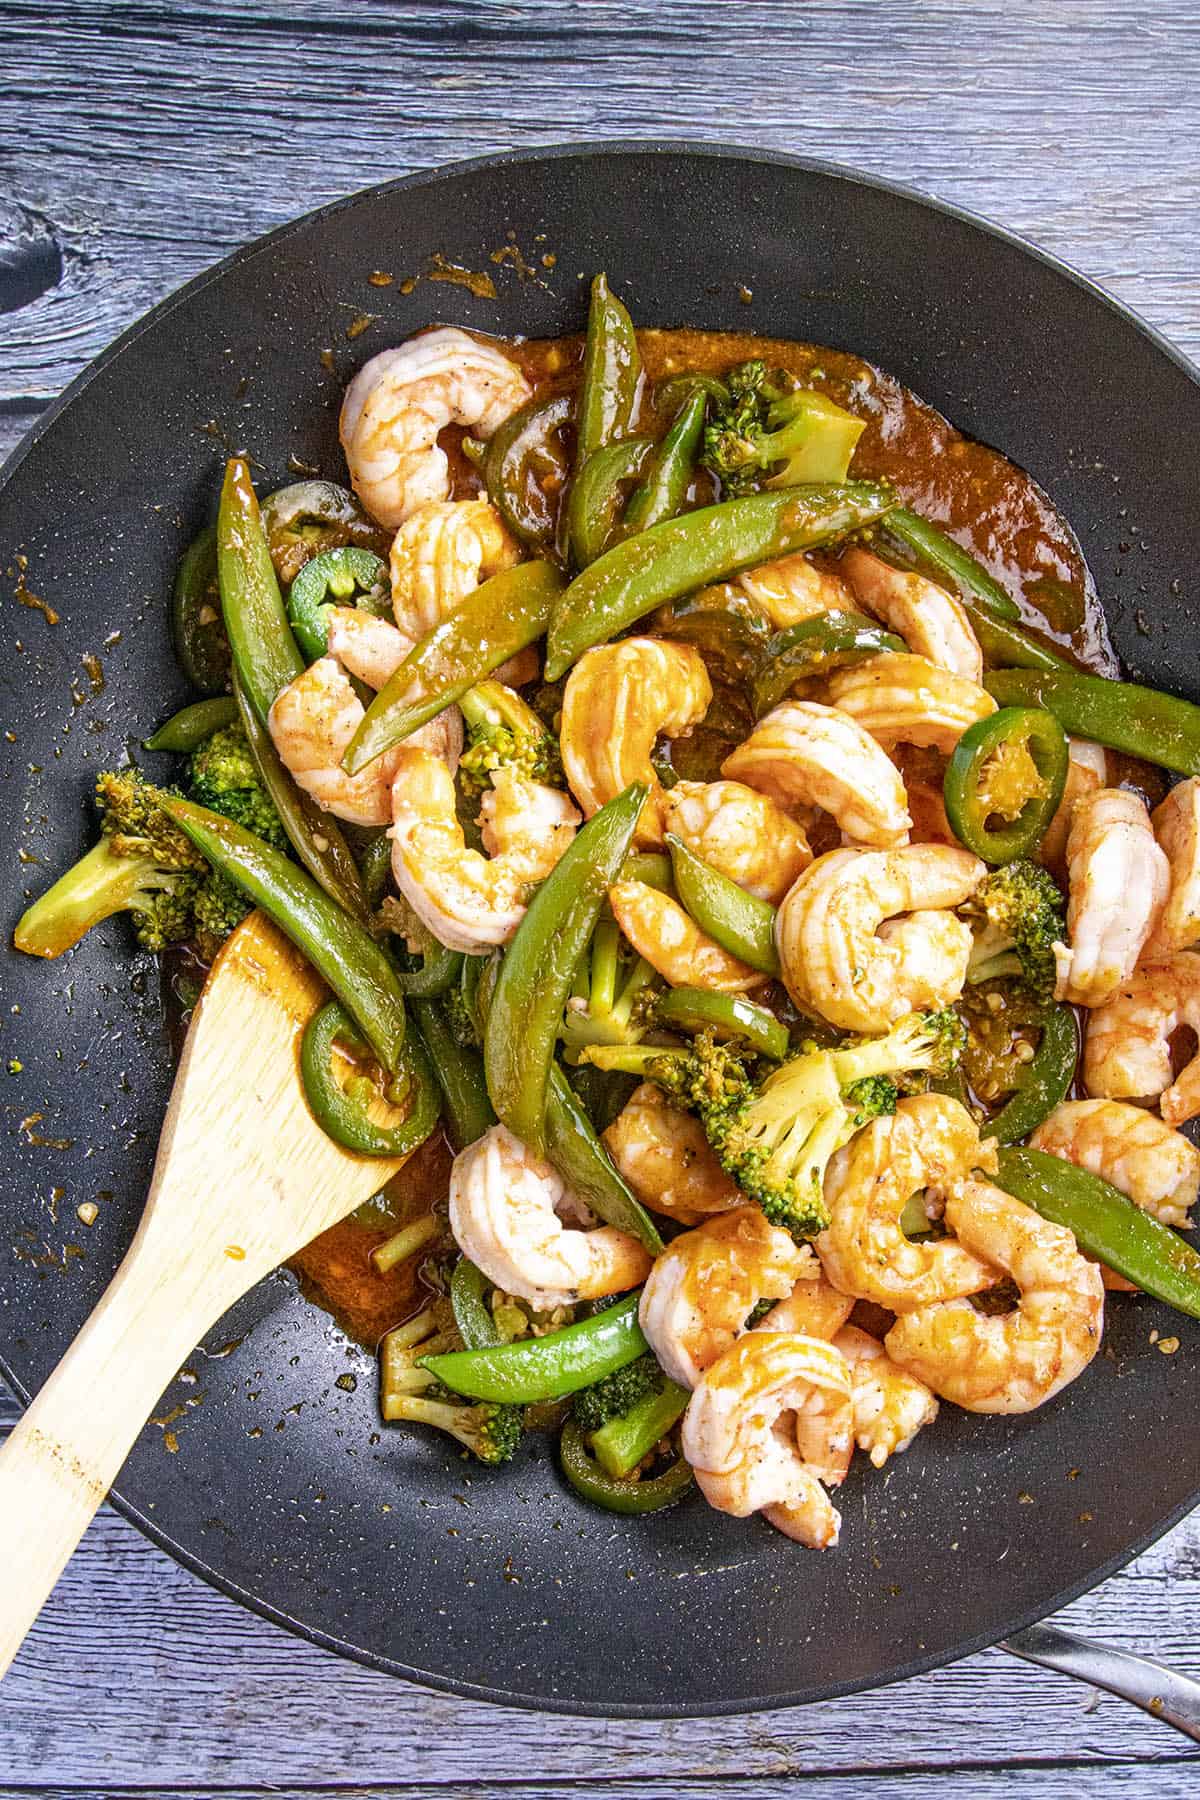 Mixing in the spicy shrimp stir fry ingredients together in a wok